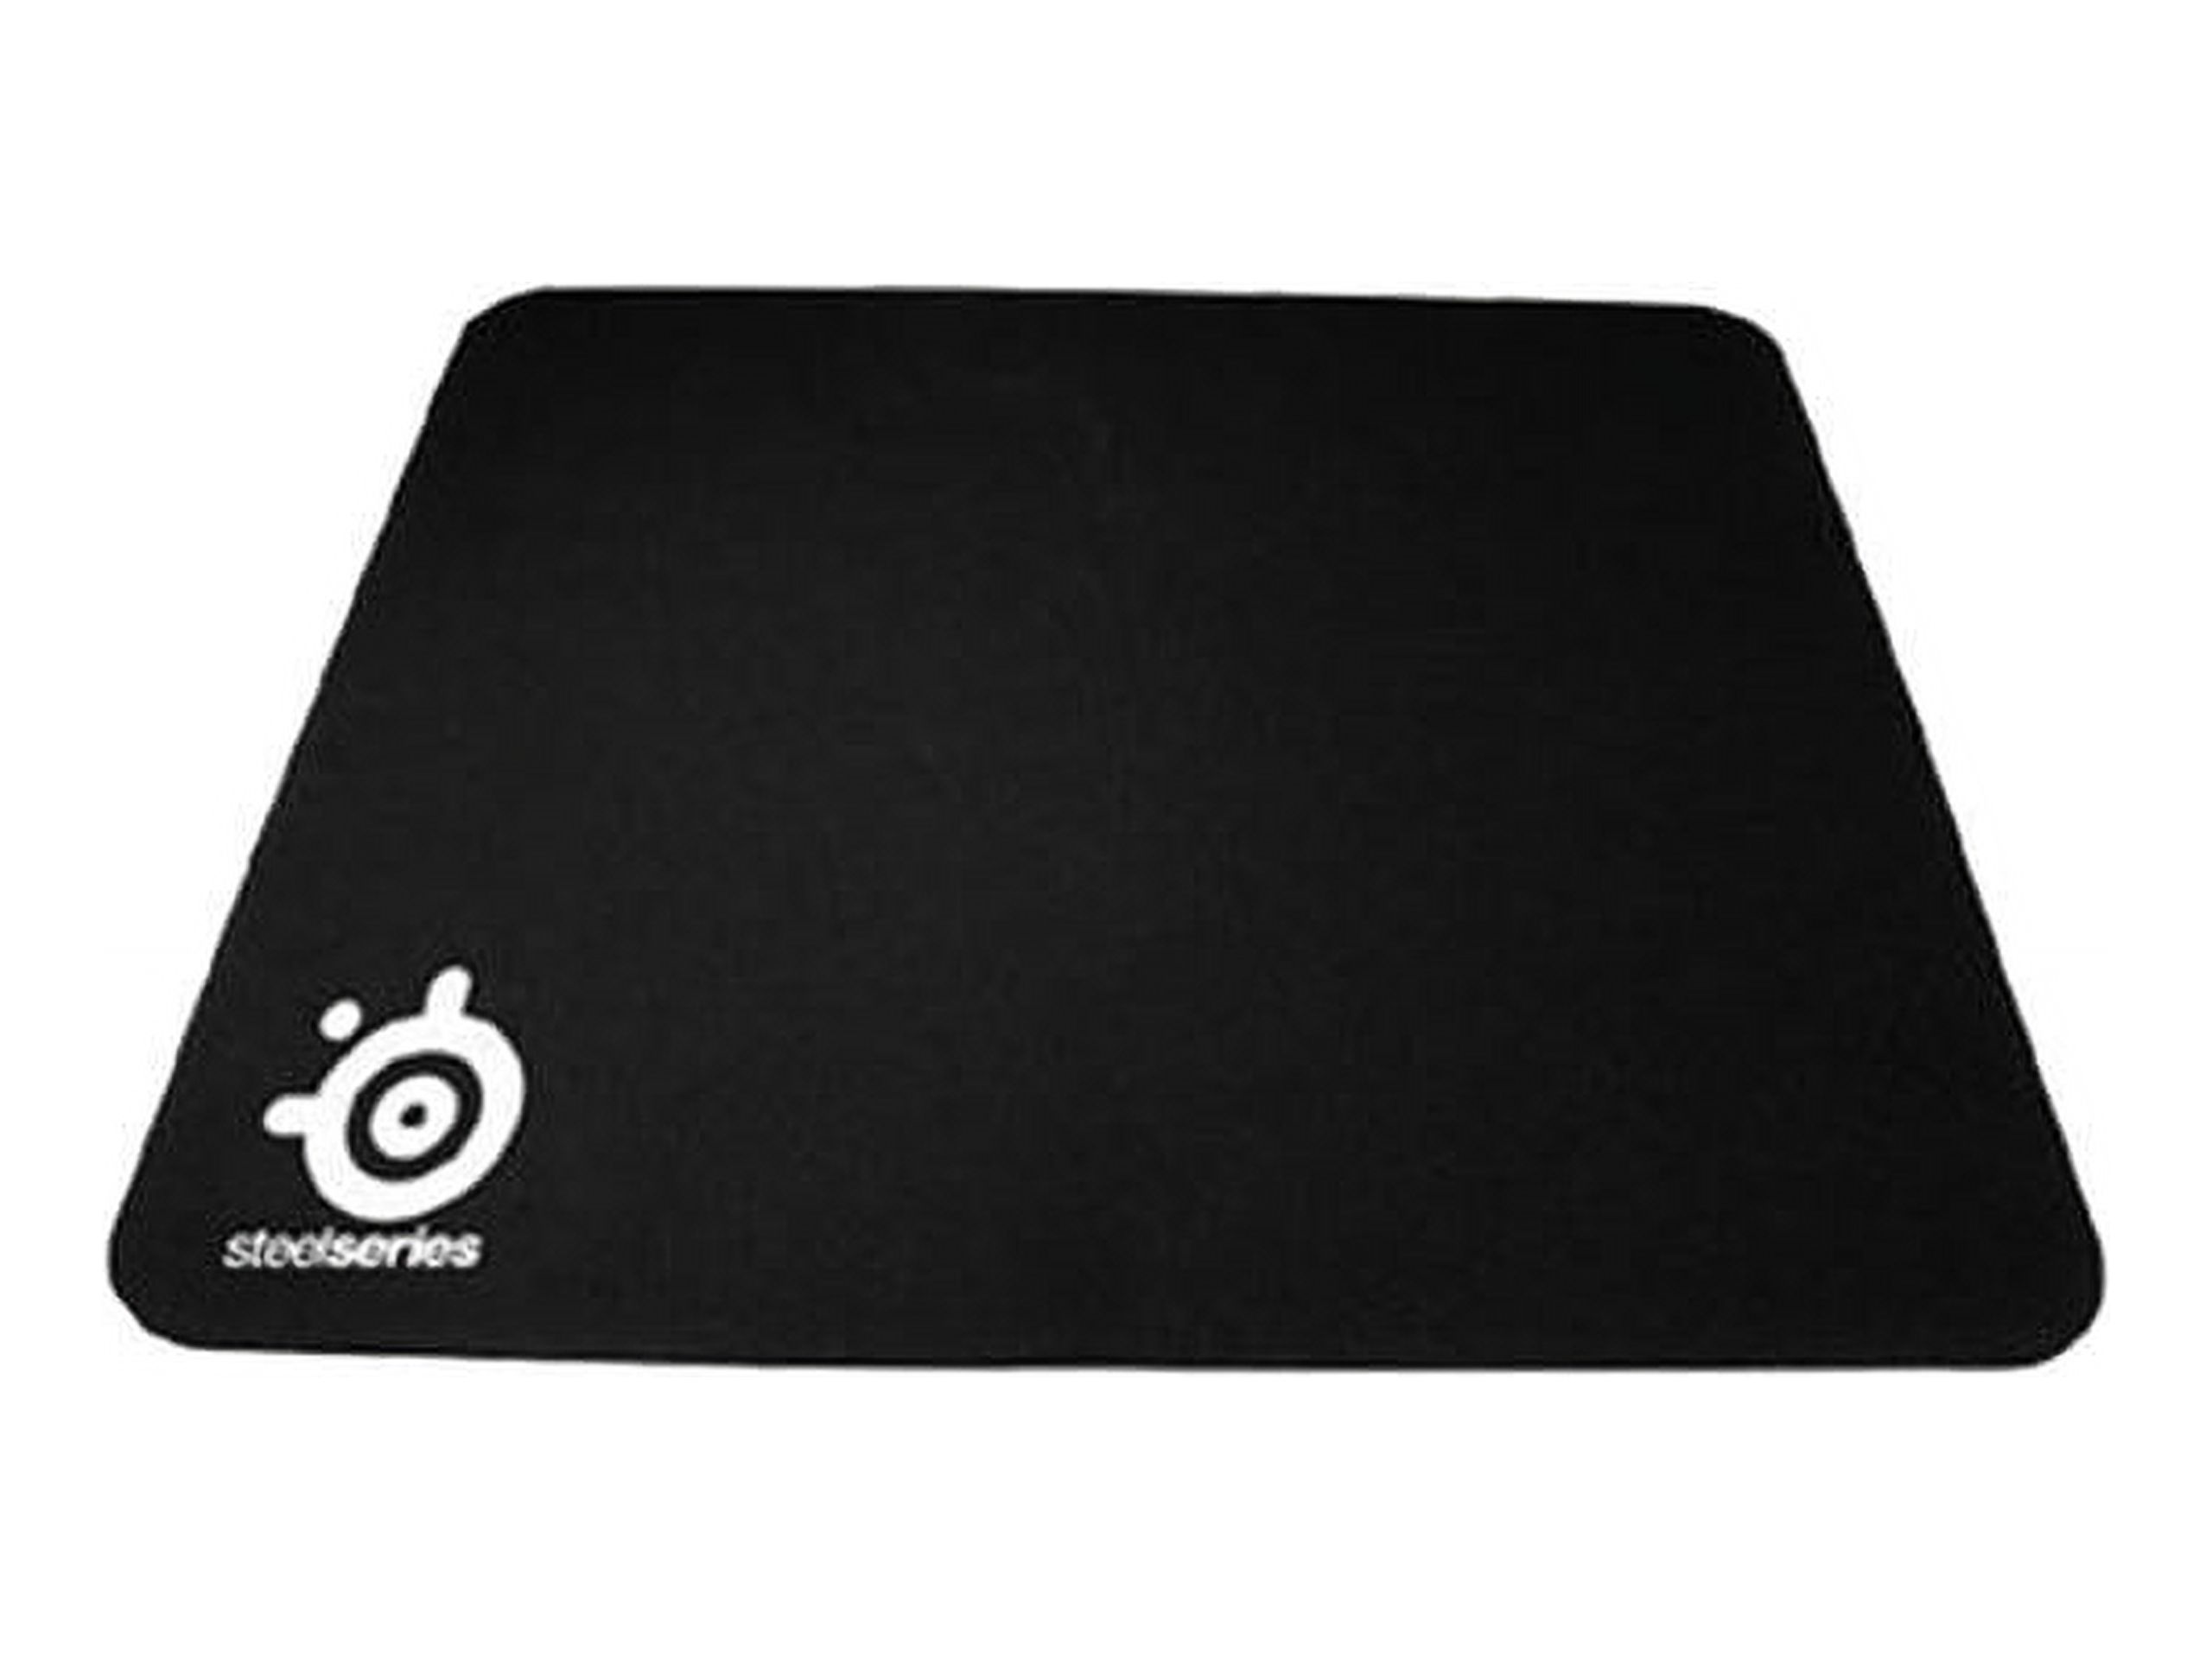 SteelSeries QcK+ Mouse Pad - image 2 of 6